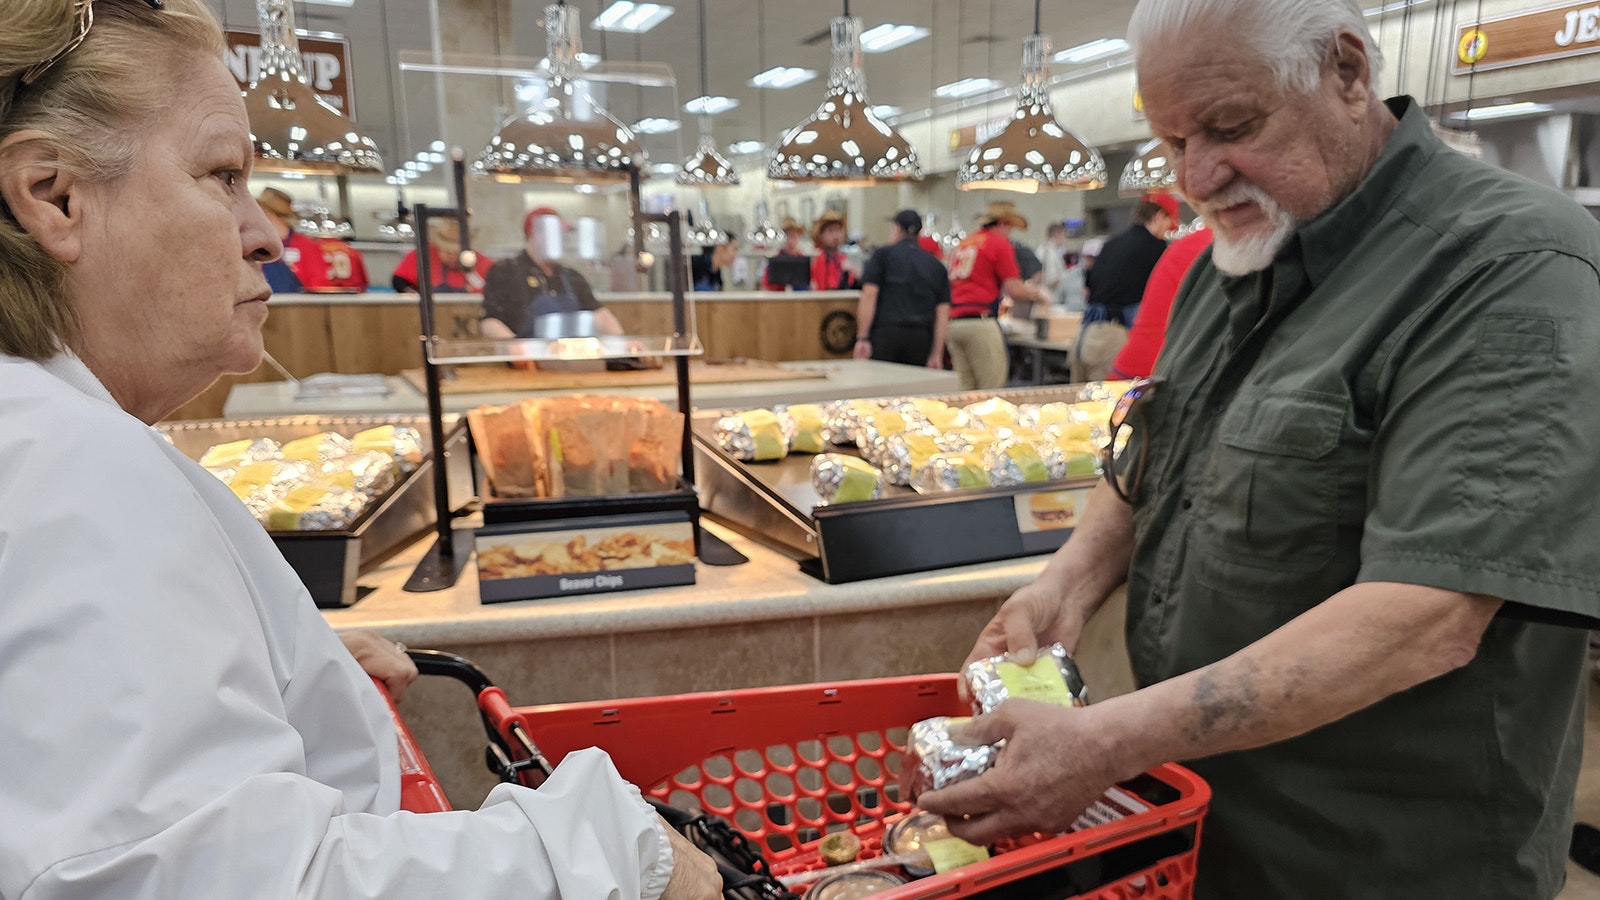 Madeline, left, and Cleto Sandover came to Buc-ee's for a brisket sandwich and to see the store.